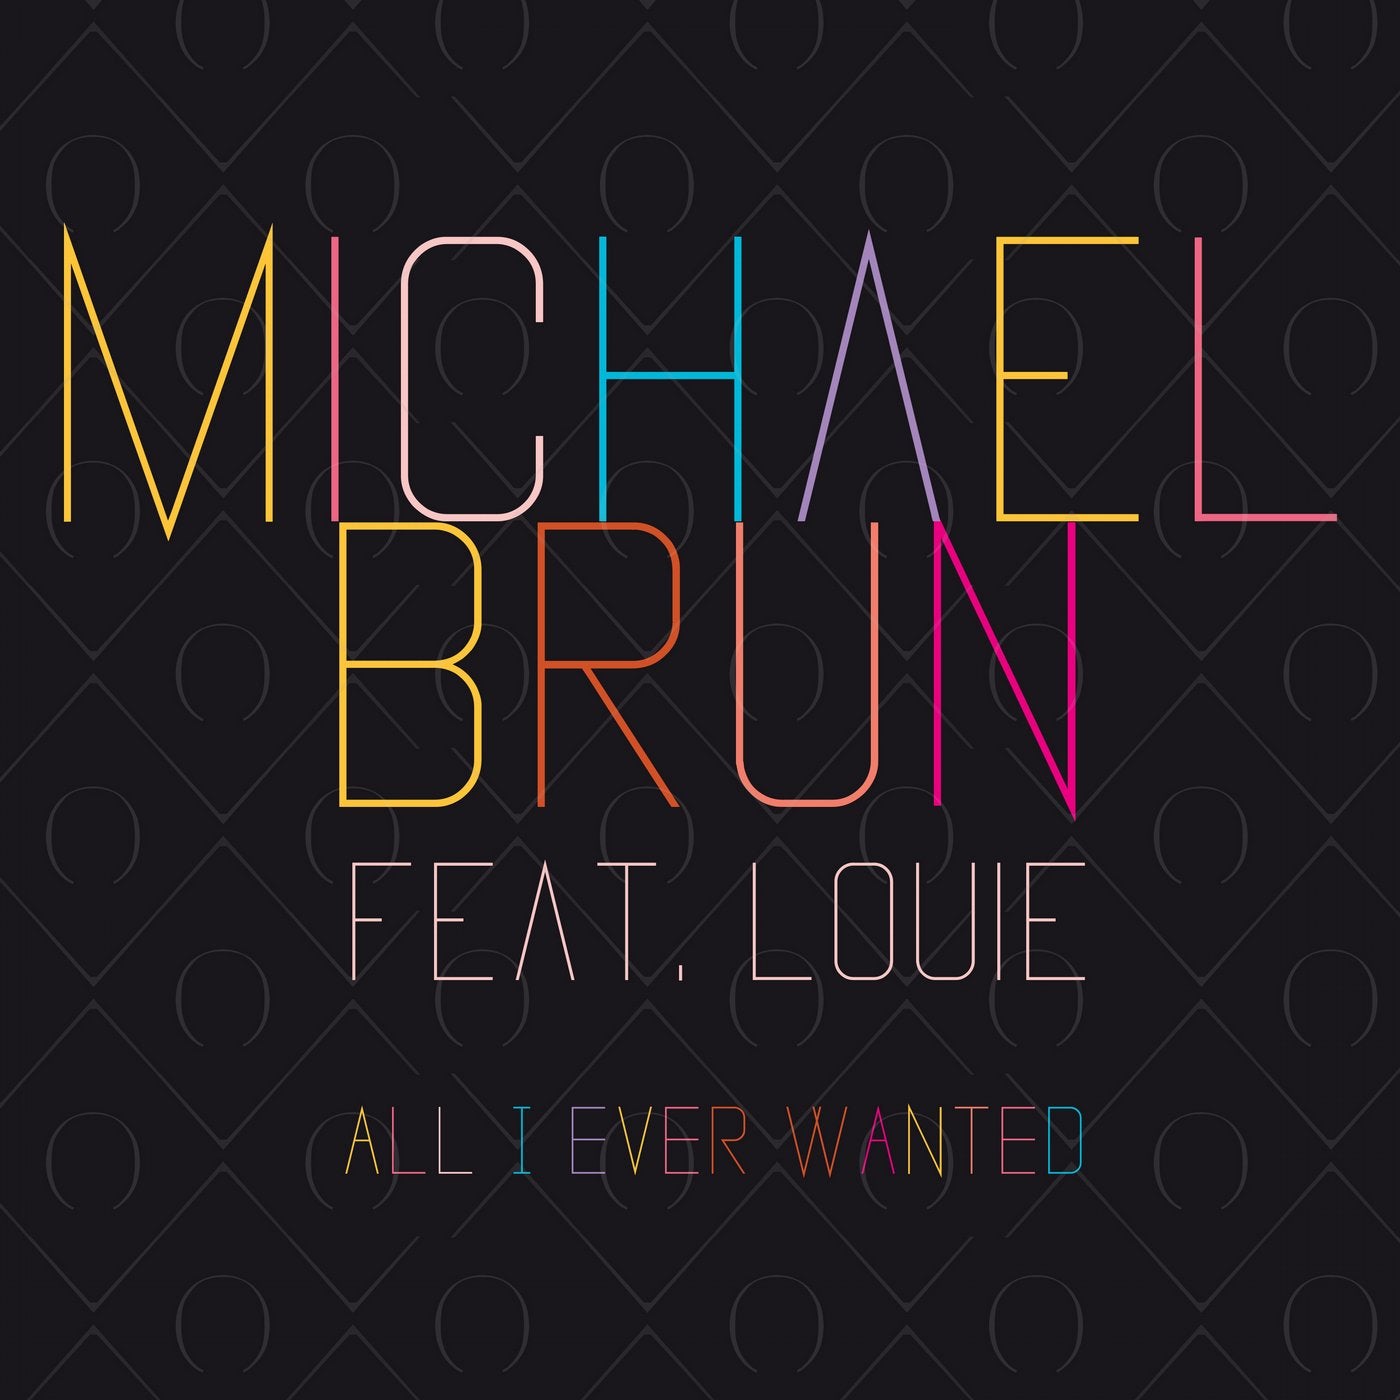 All I Ever Wanted feat. Louie